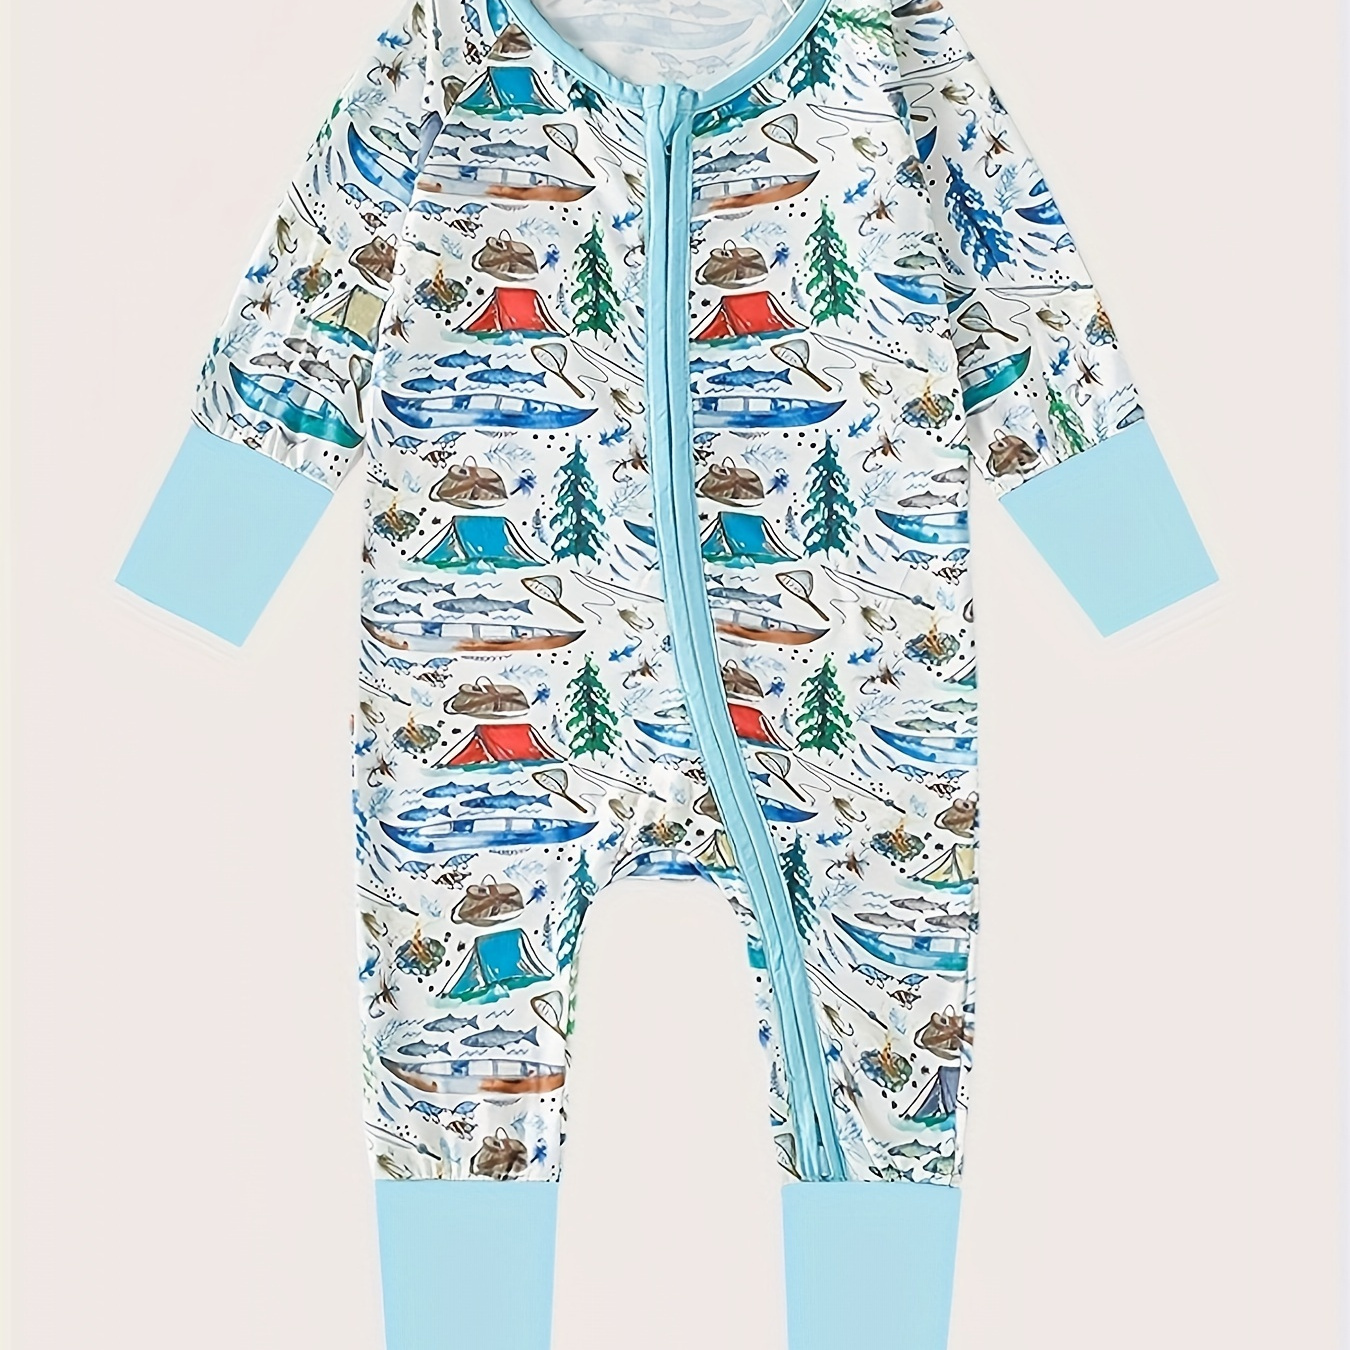 

Infant's Camp Graffiti Allover Print Bodysuit, Comfy Long Sleeve Onesie, Baby Boy's Clothing, As Gift